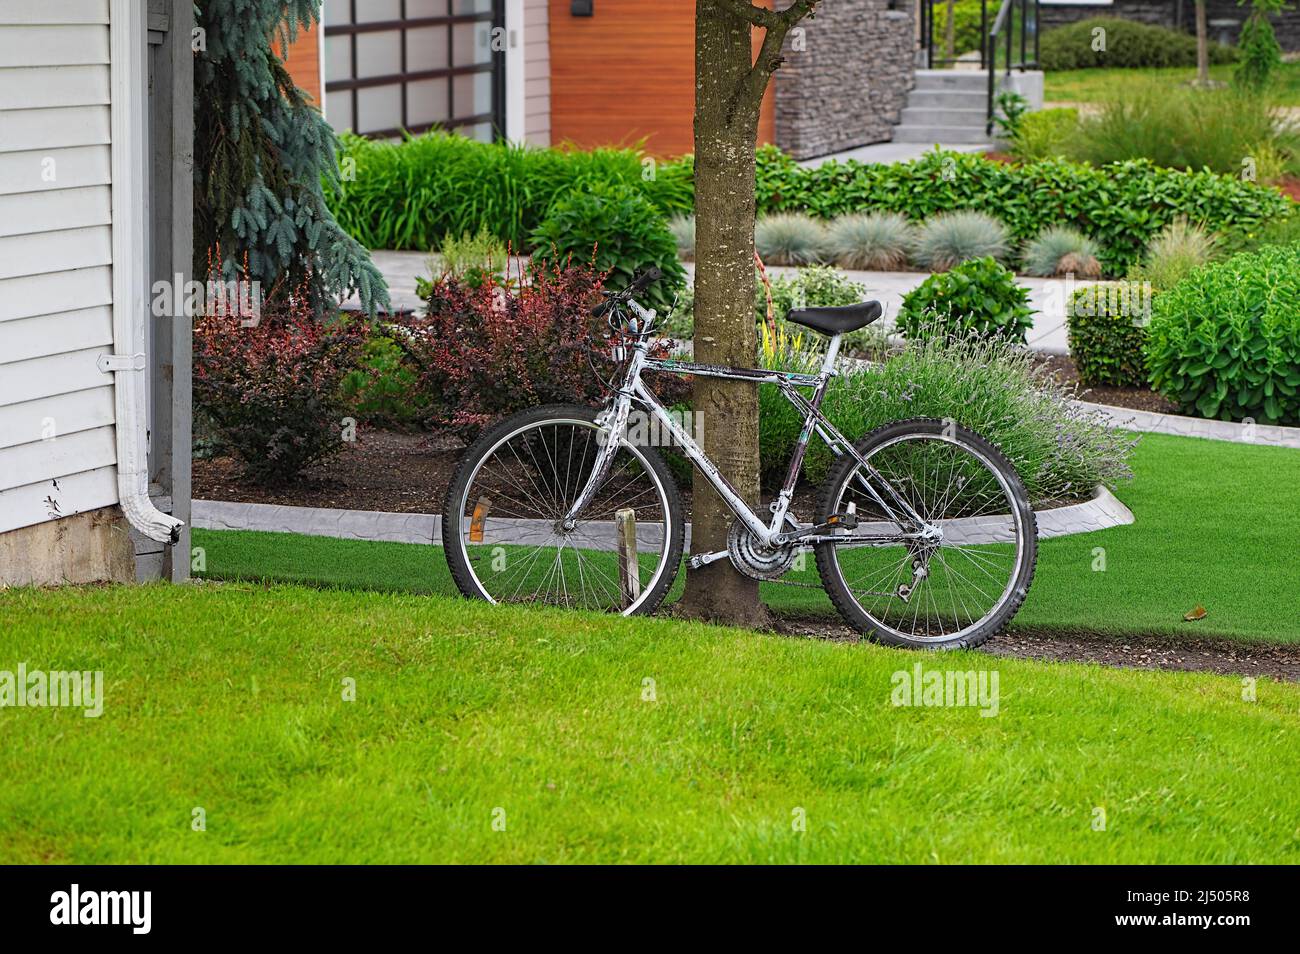 A bicycle leaning against a tree trunk in a residential neighbourhood. Stock Photo